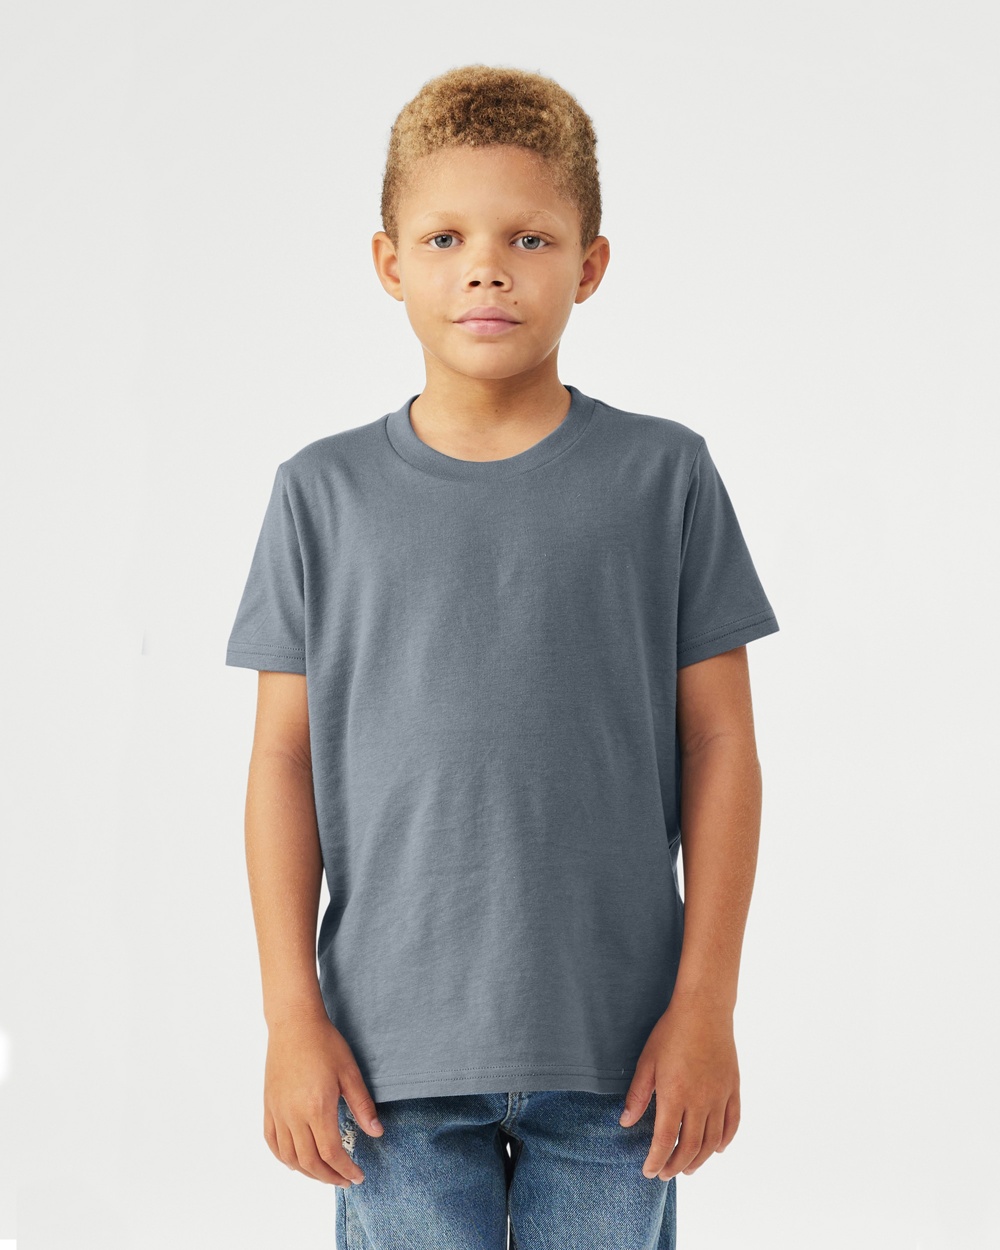 CV219 - Youth Jersey Short Sleeve Tee - One Stop